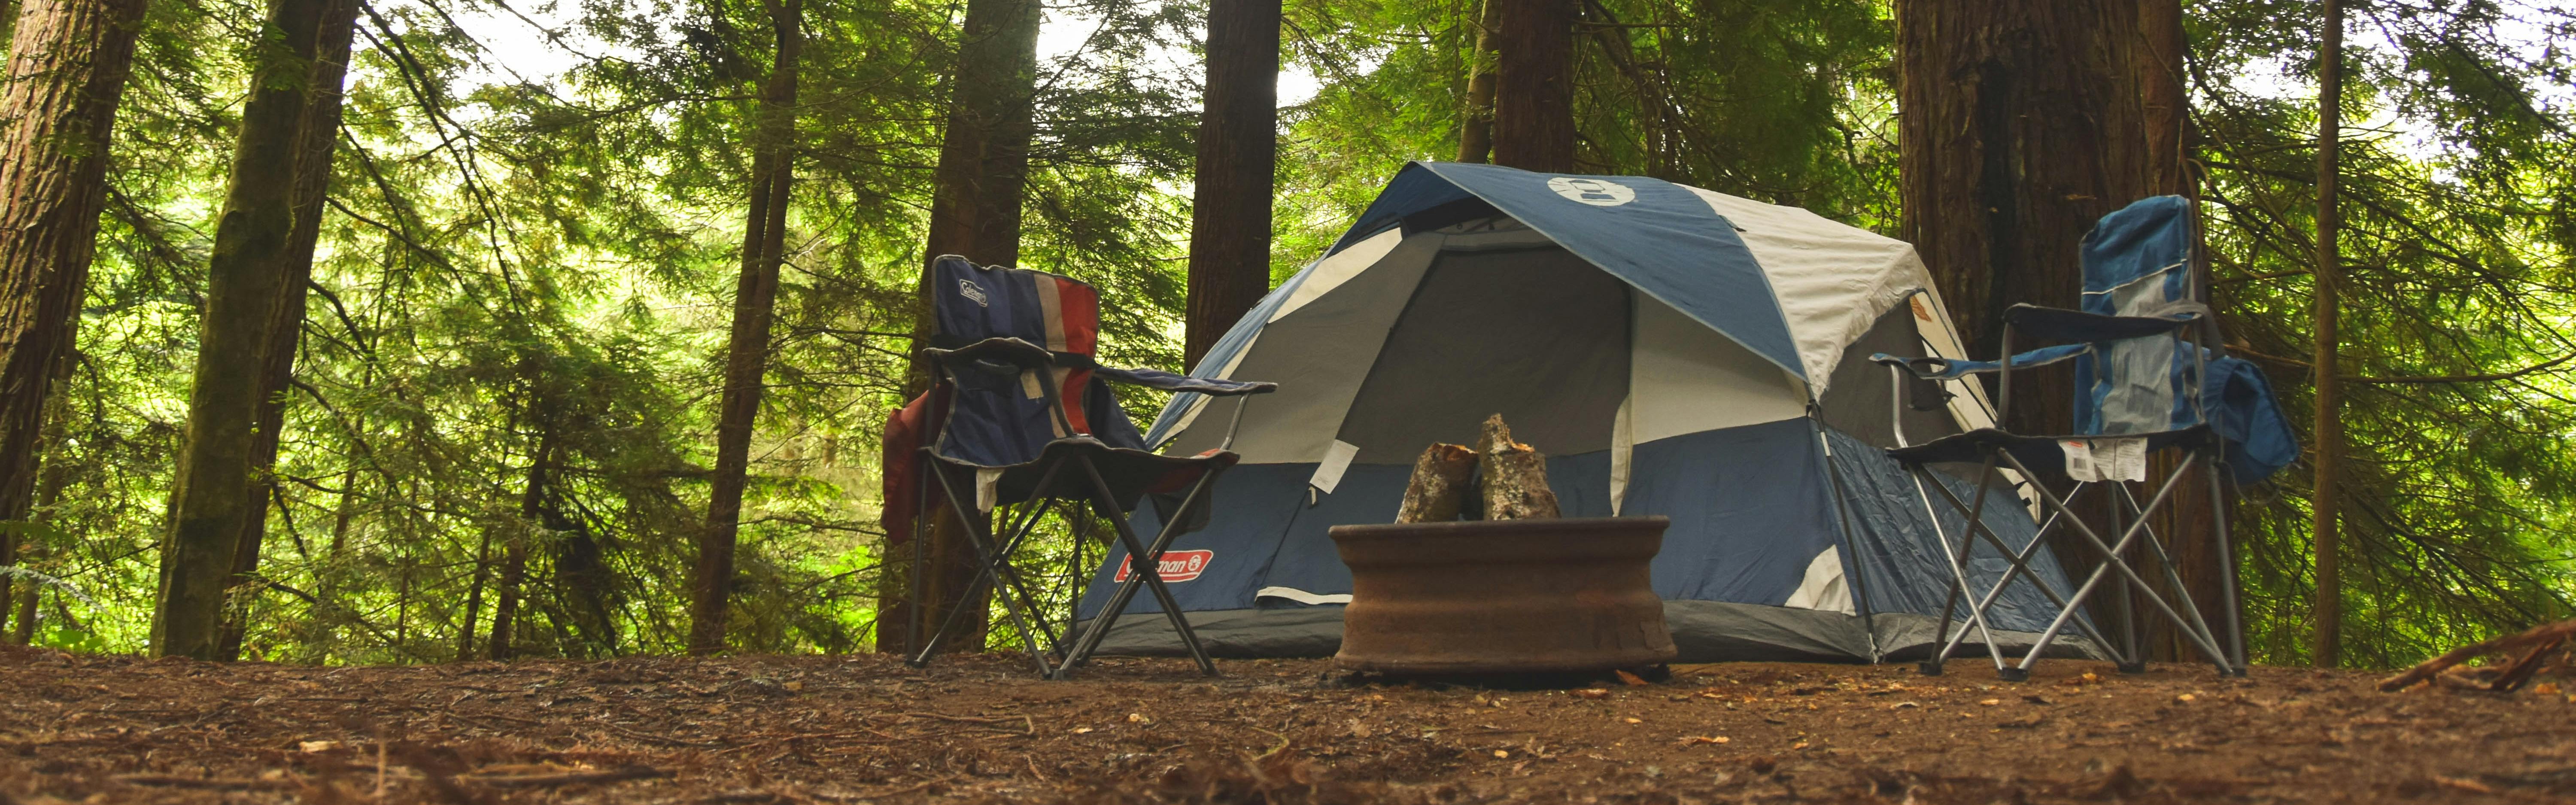 The Importance of Lighting Your Campsite - the Best Lighting Solutions